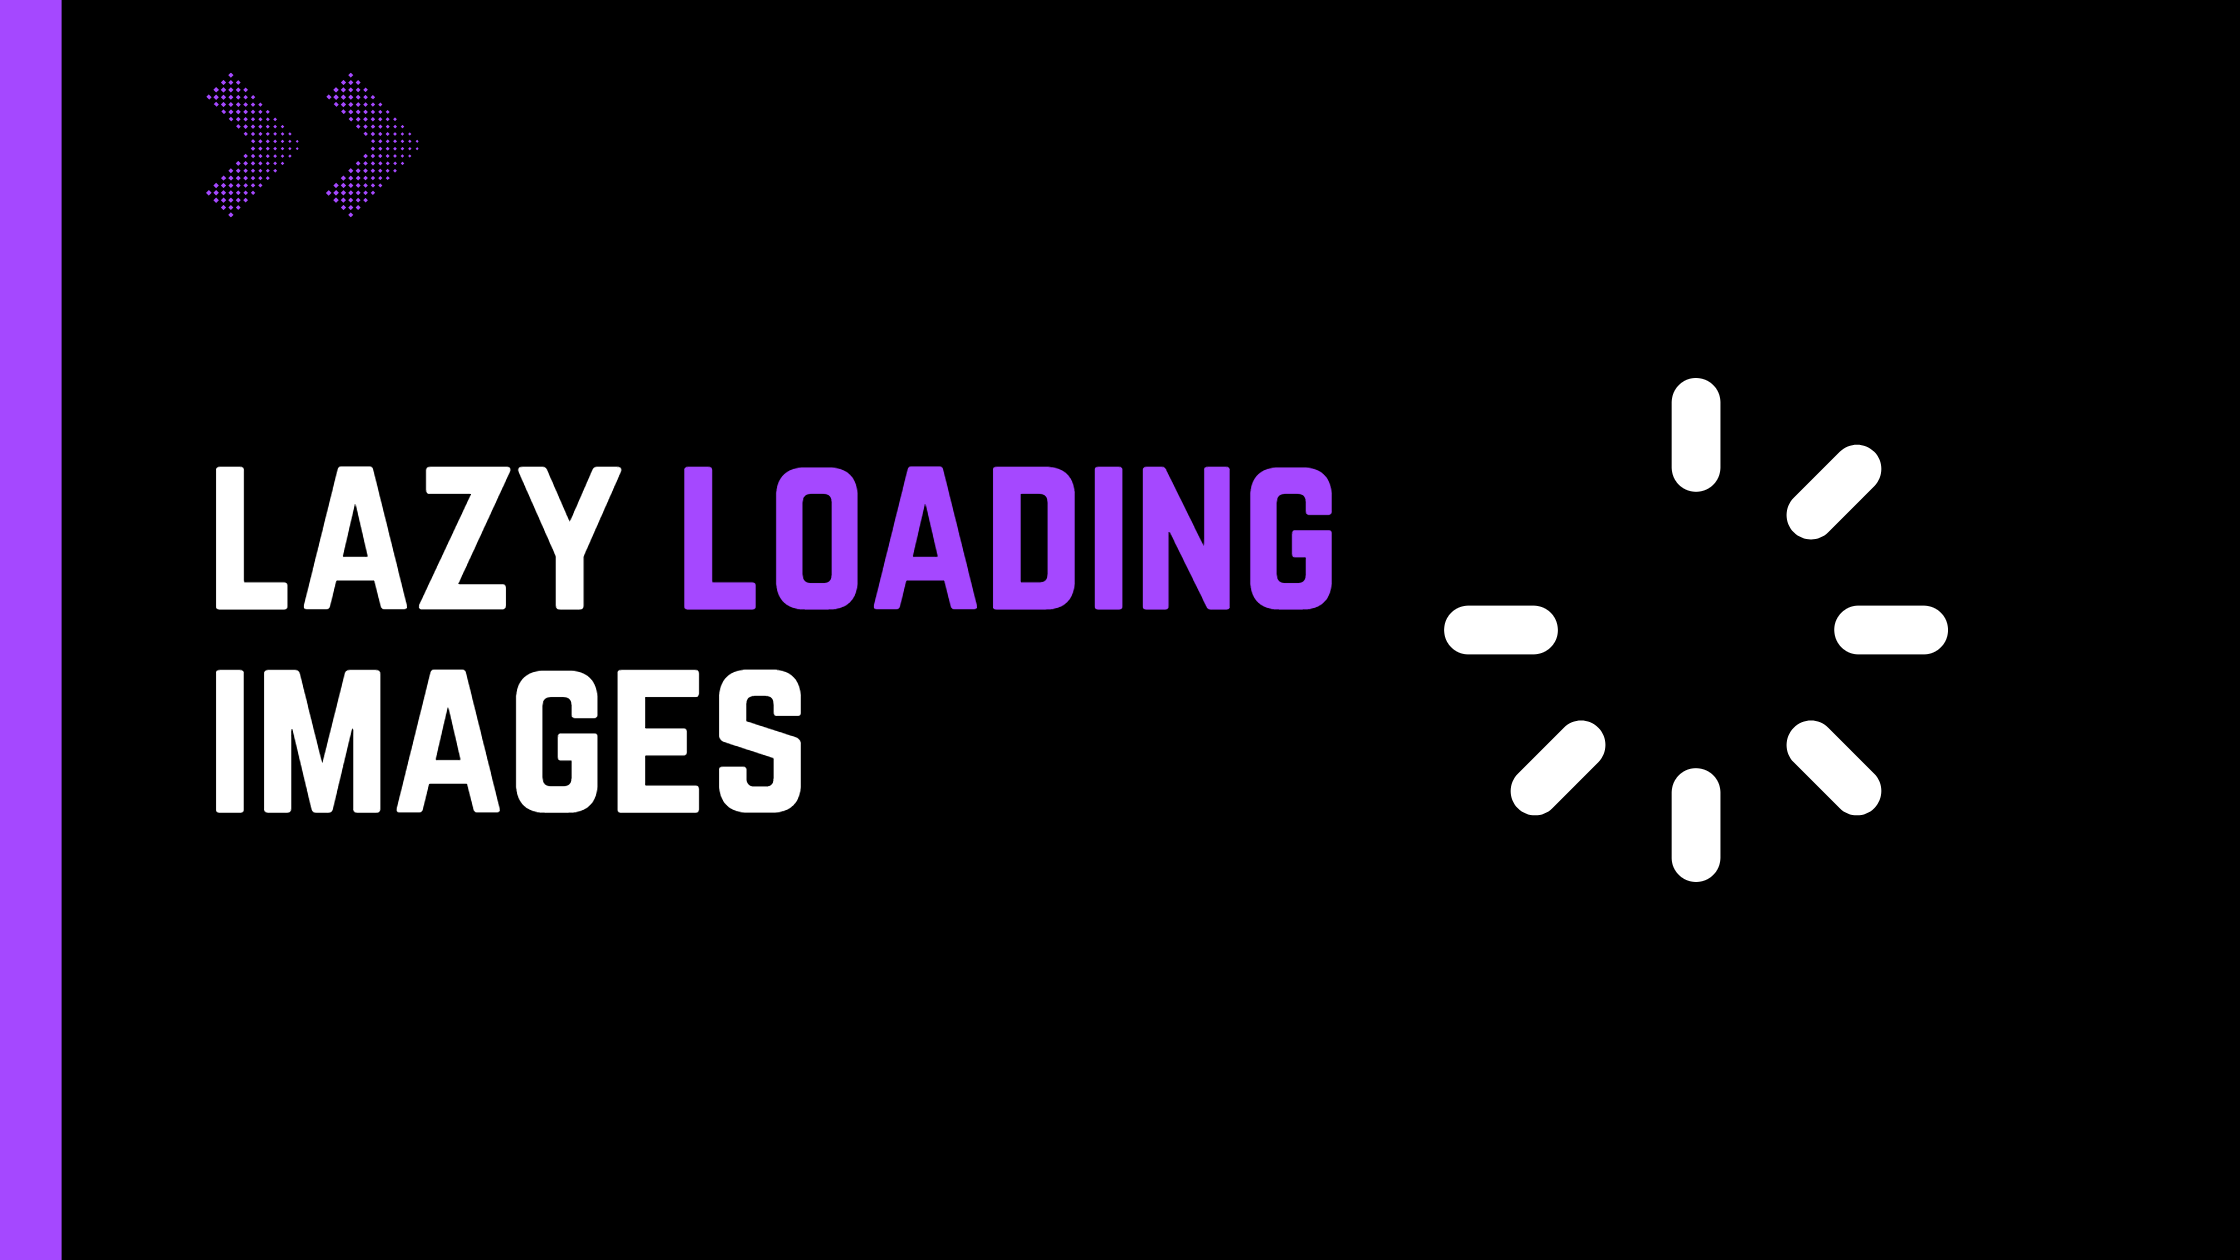 How to natively lazy load images on your website to improve performance
